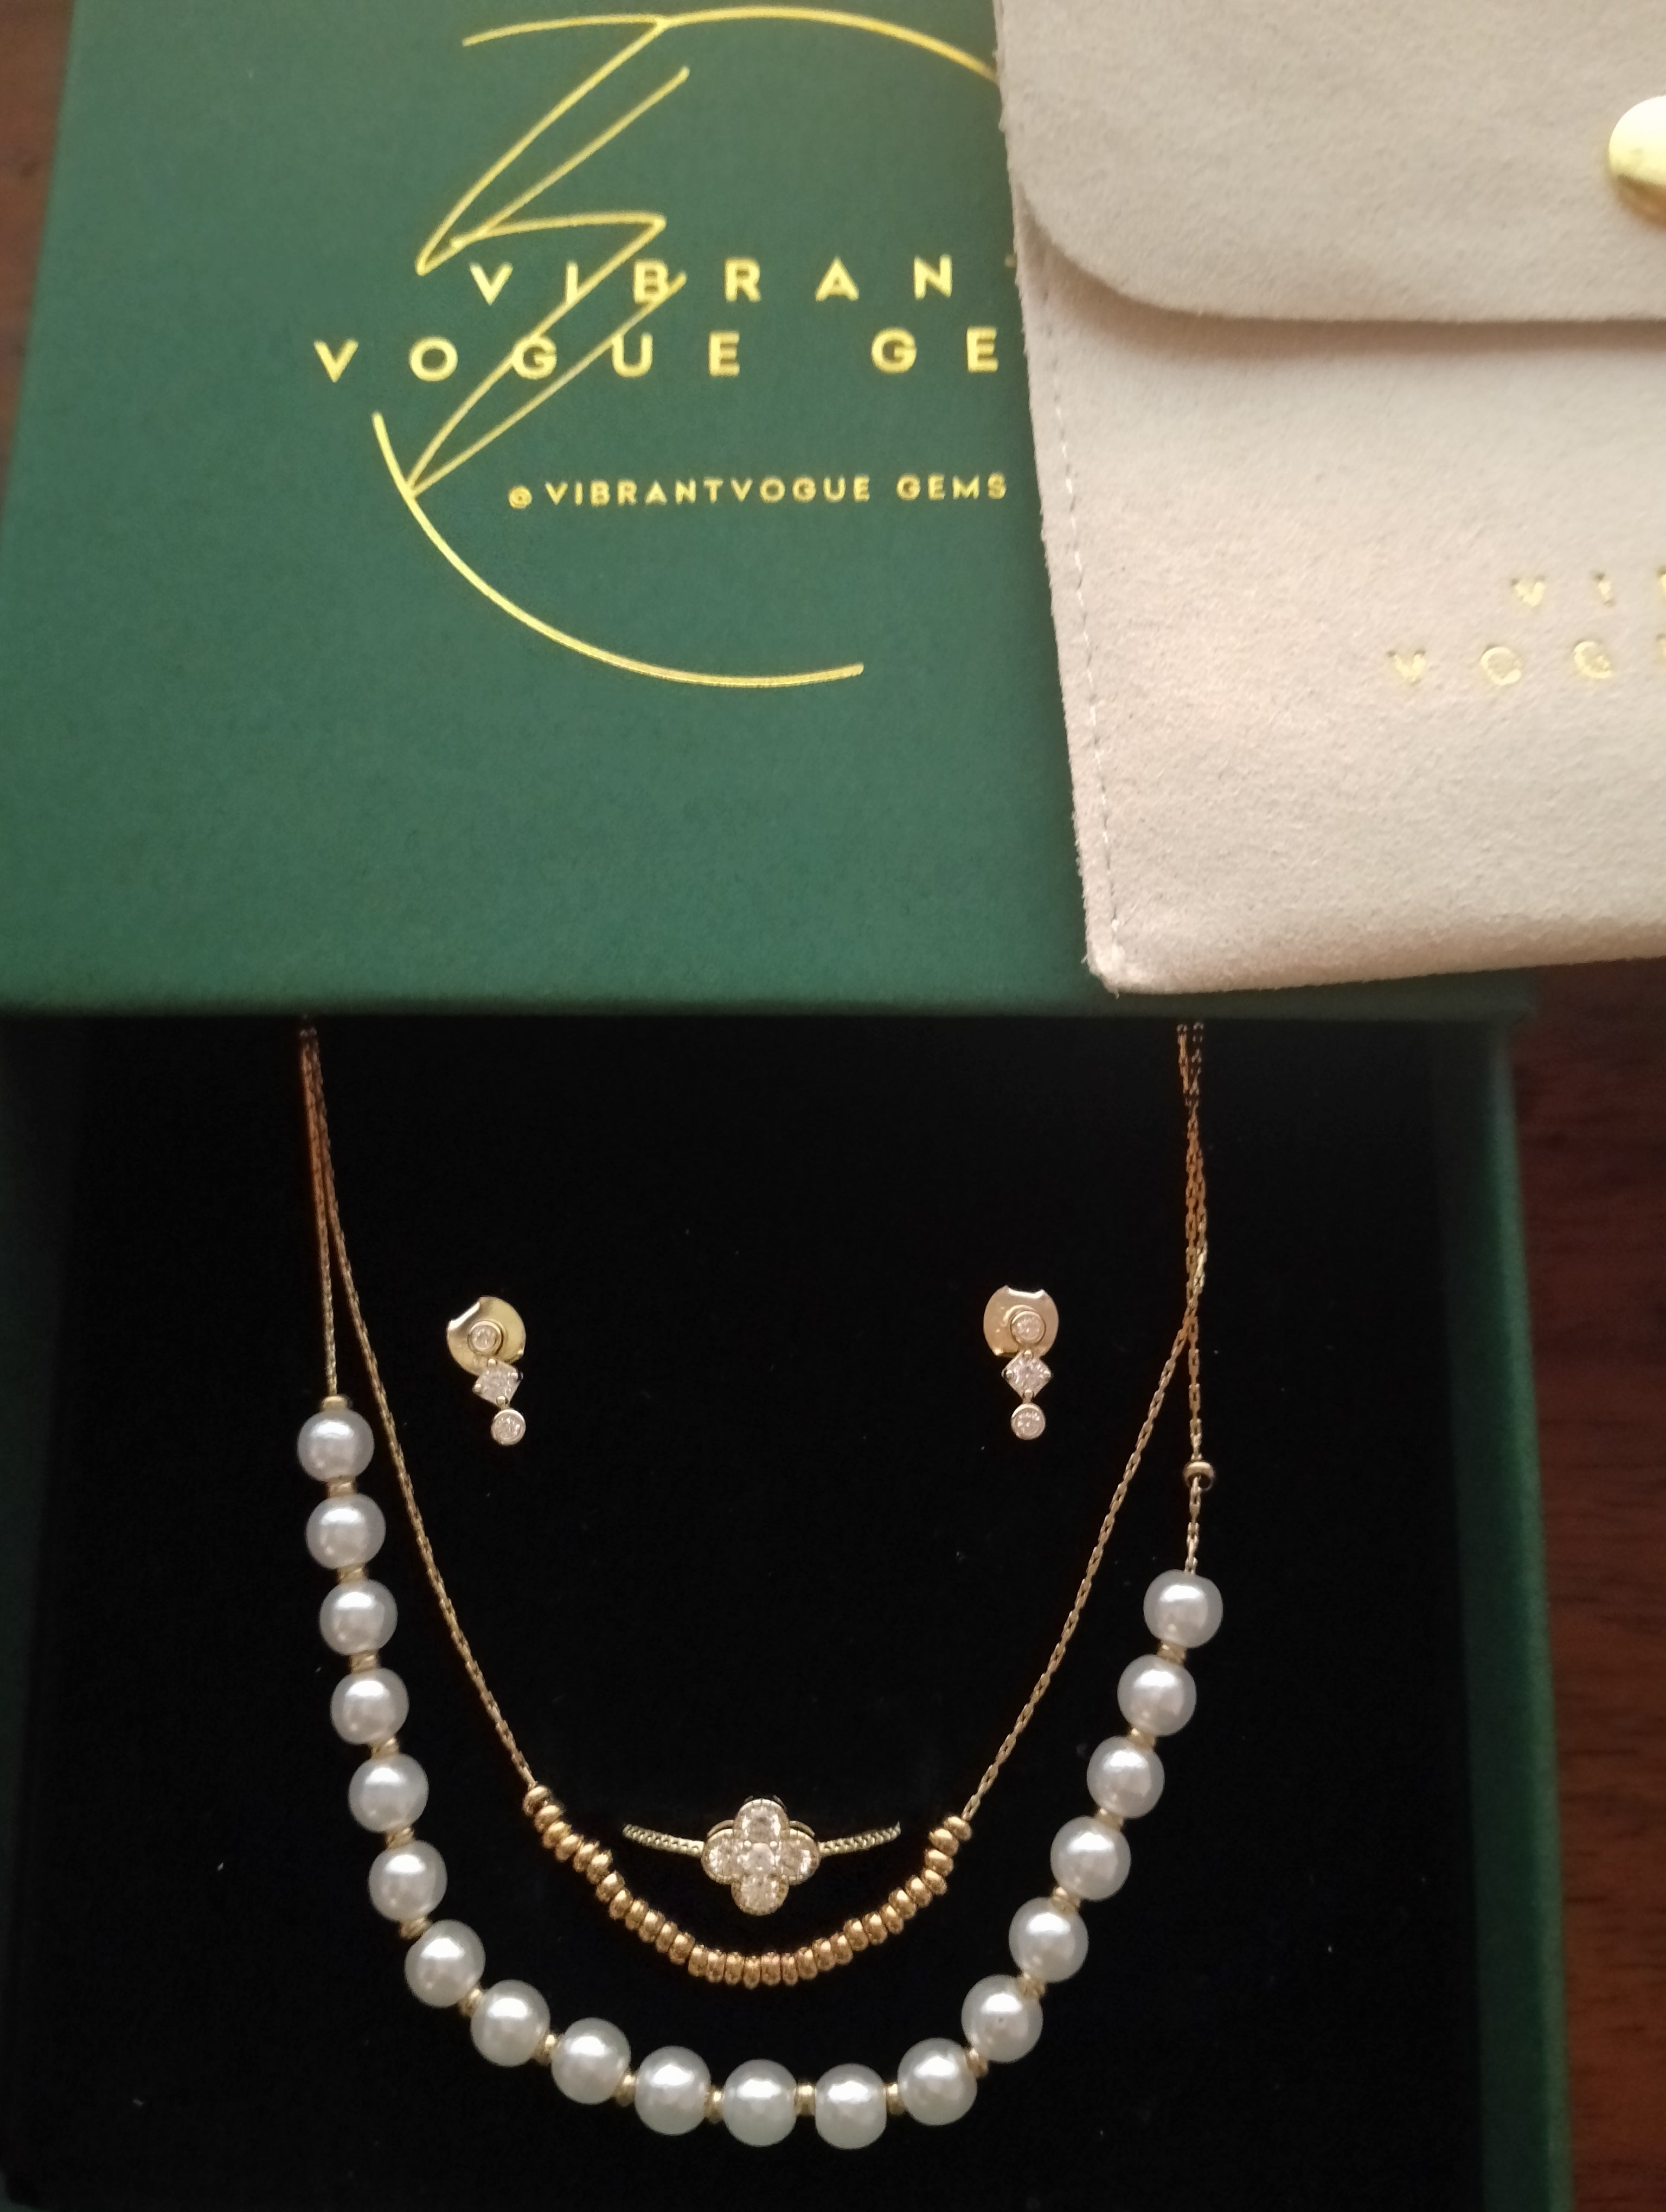 Nature's Grace Collection: Irish Leaf Elegance Ring, Pearl Elegance Necklace & Triple Pendant Radiance Earrings